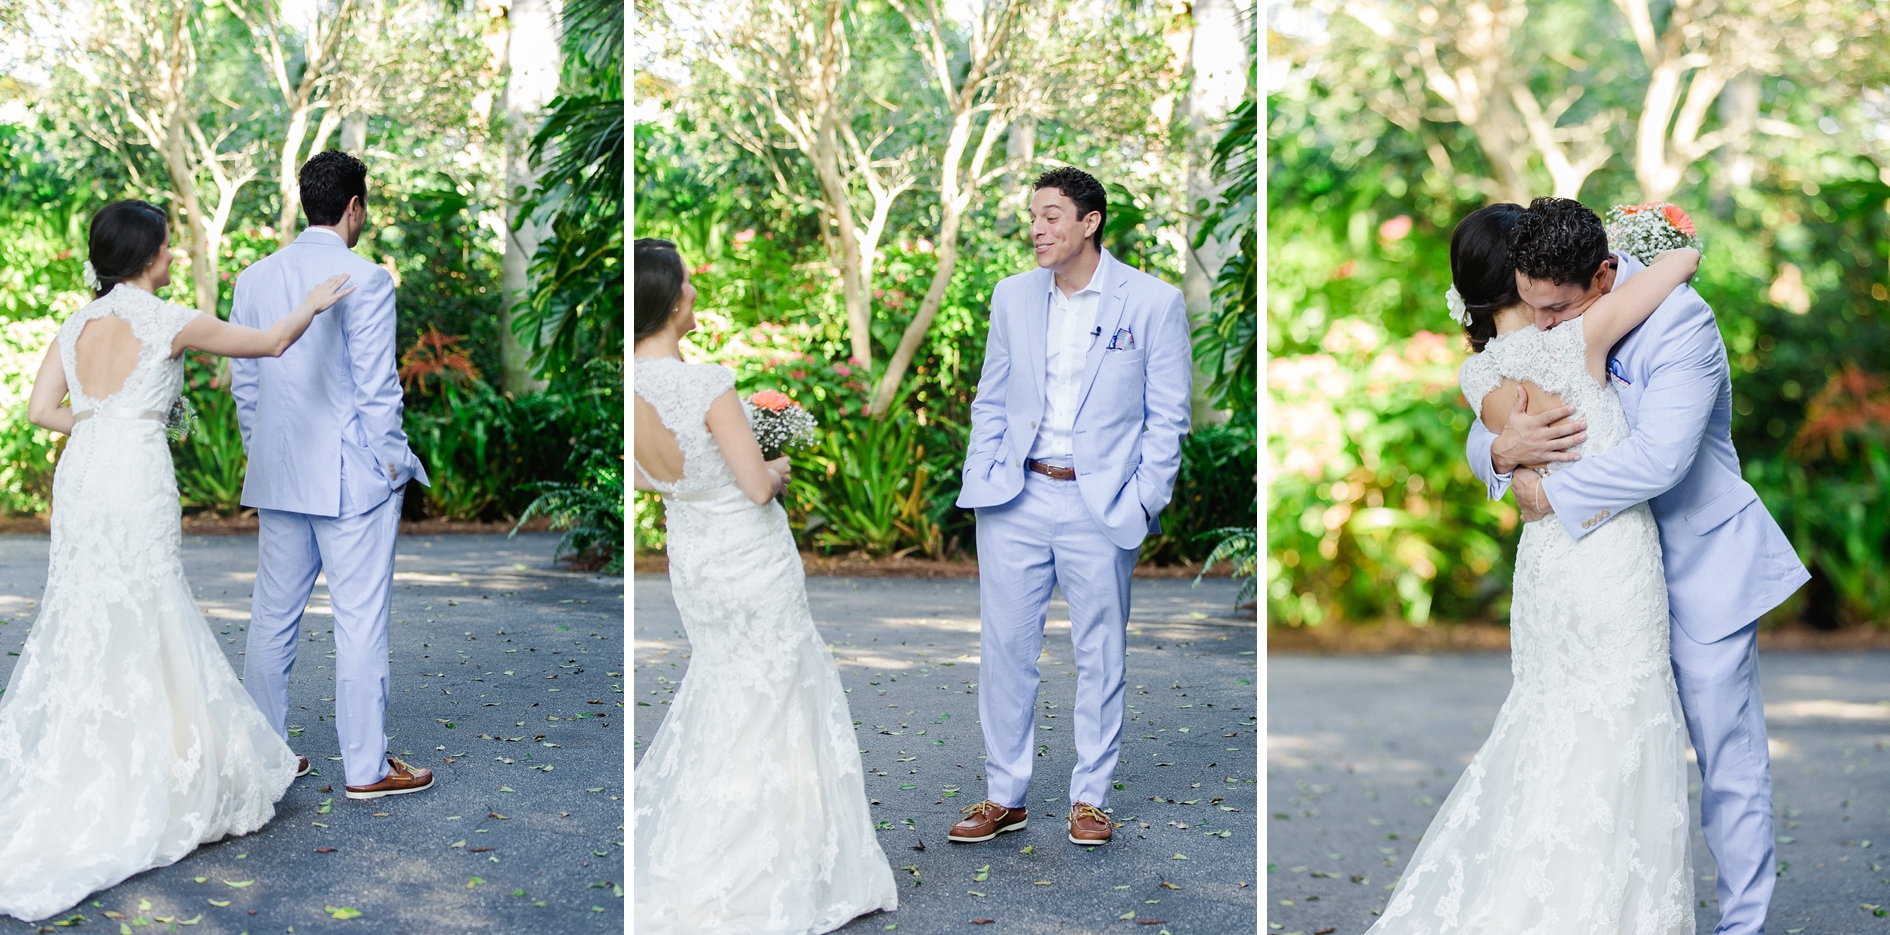 Why we love First Look | @ Ailyn La Torre Photography 2015